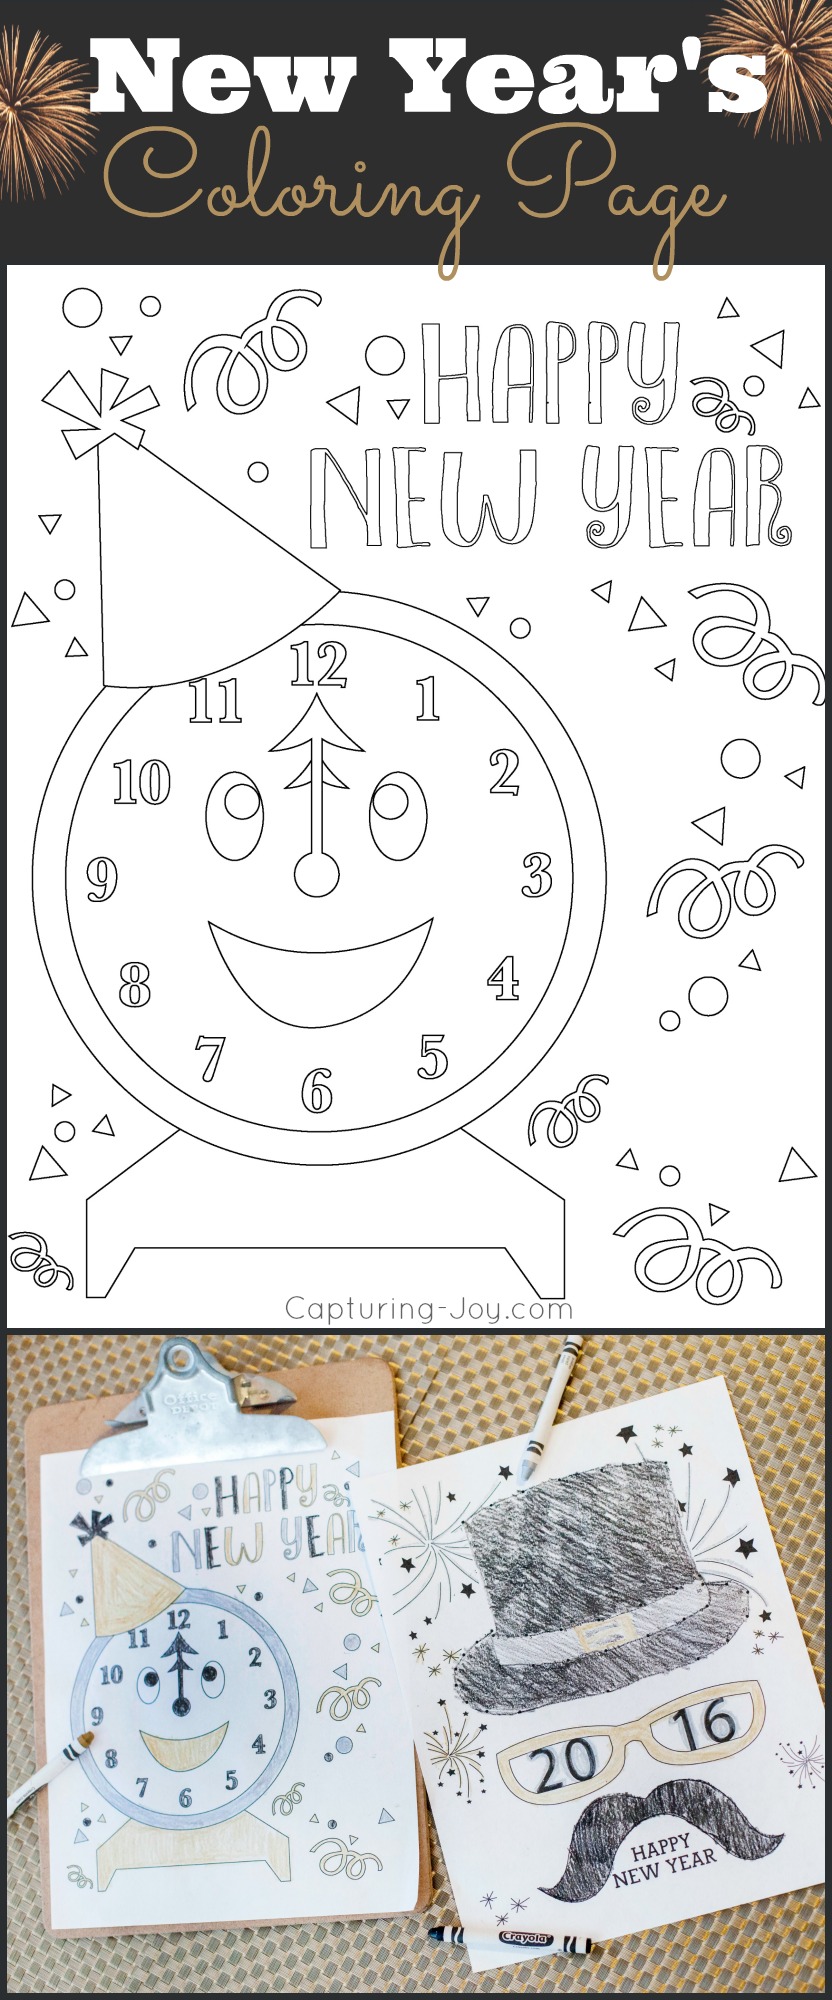 New Year's Coloring Page